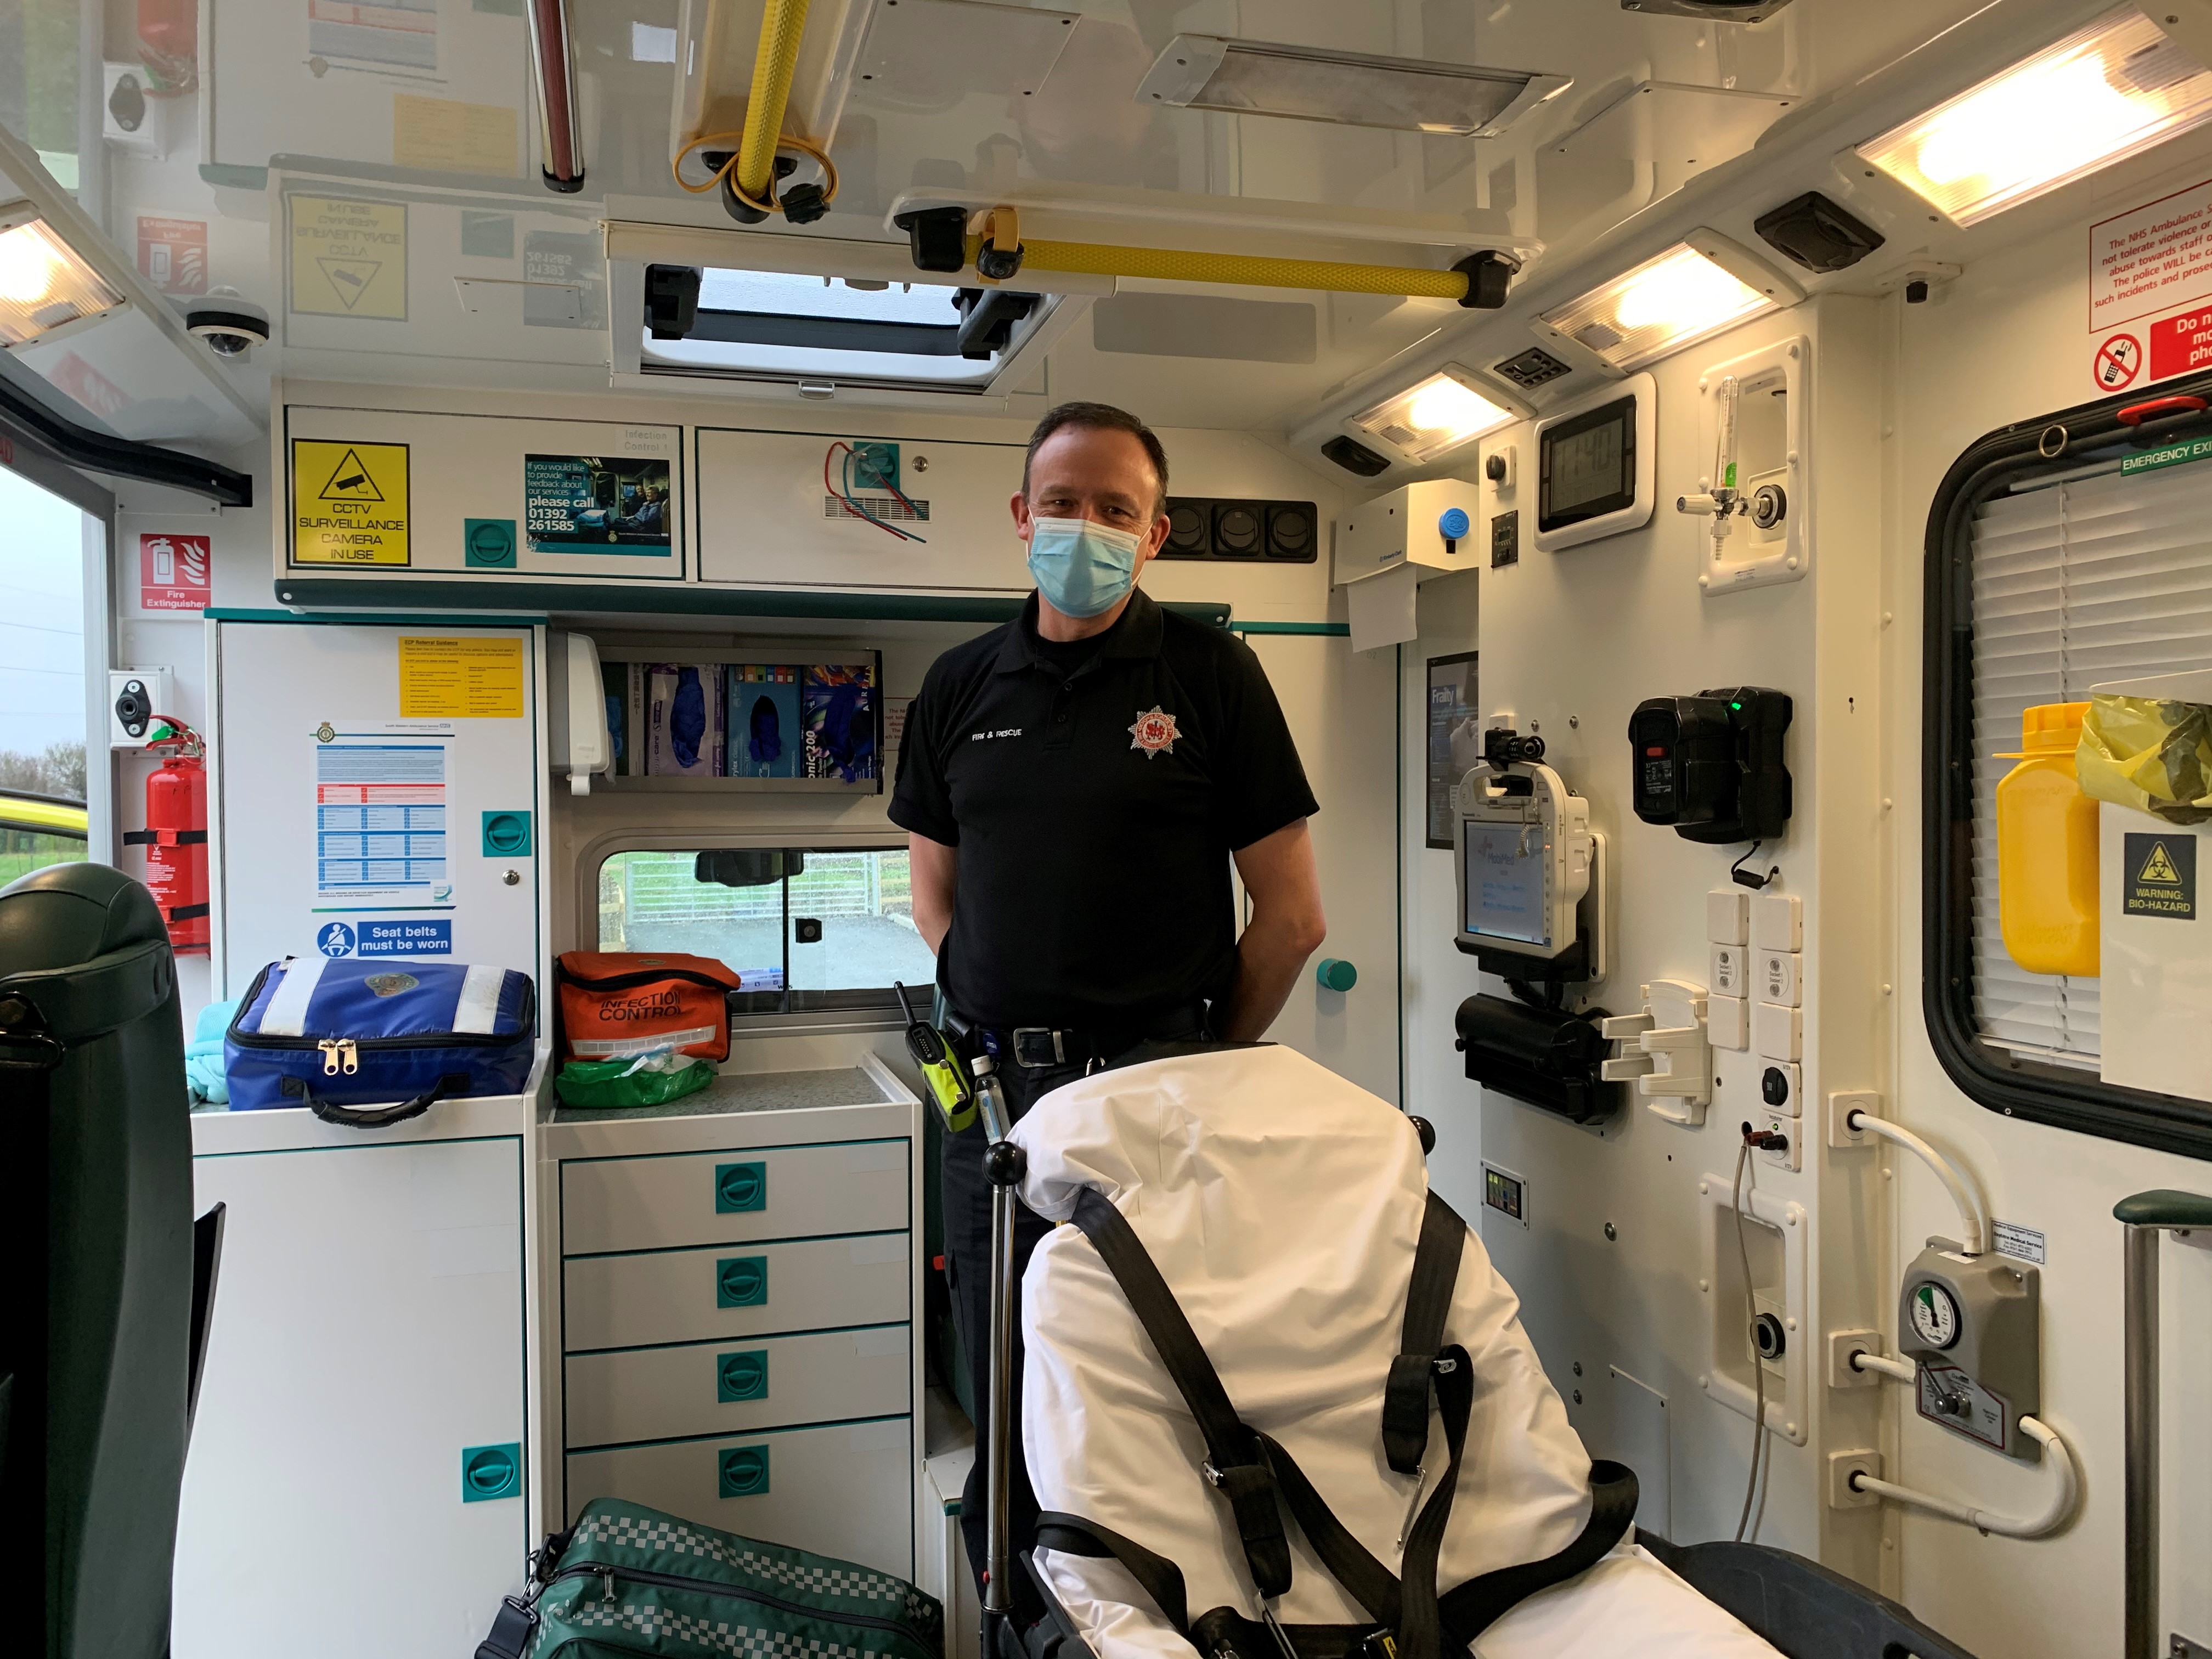 One of our firefighters, Robert Partridge, stood in the back of an ambulance surrounded by lots of ambulance equipment. He has his firefighter uniform on (which is a black shirt and trousers) and a mask.